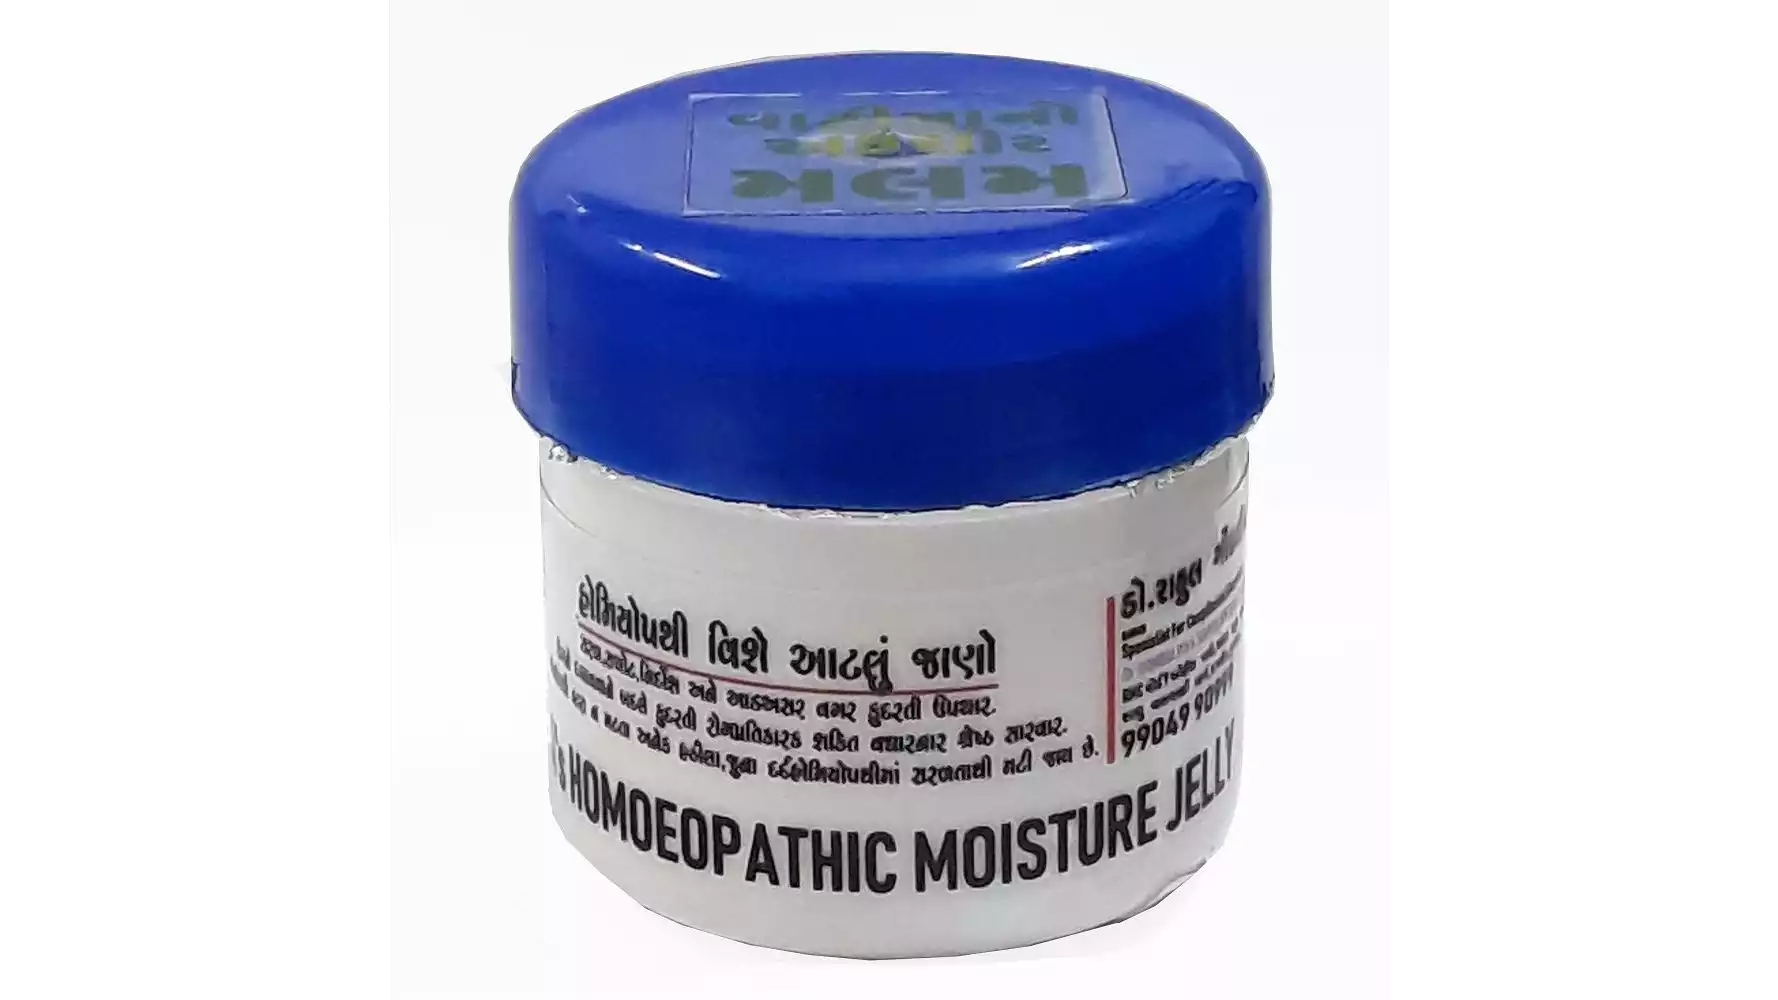 Dr Gondaliyas Homoeopathic Foot Crack Moisture Jelly (25g)